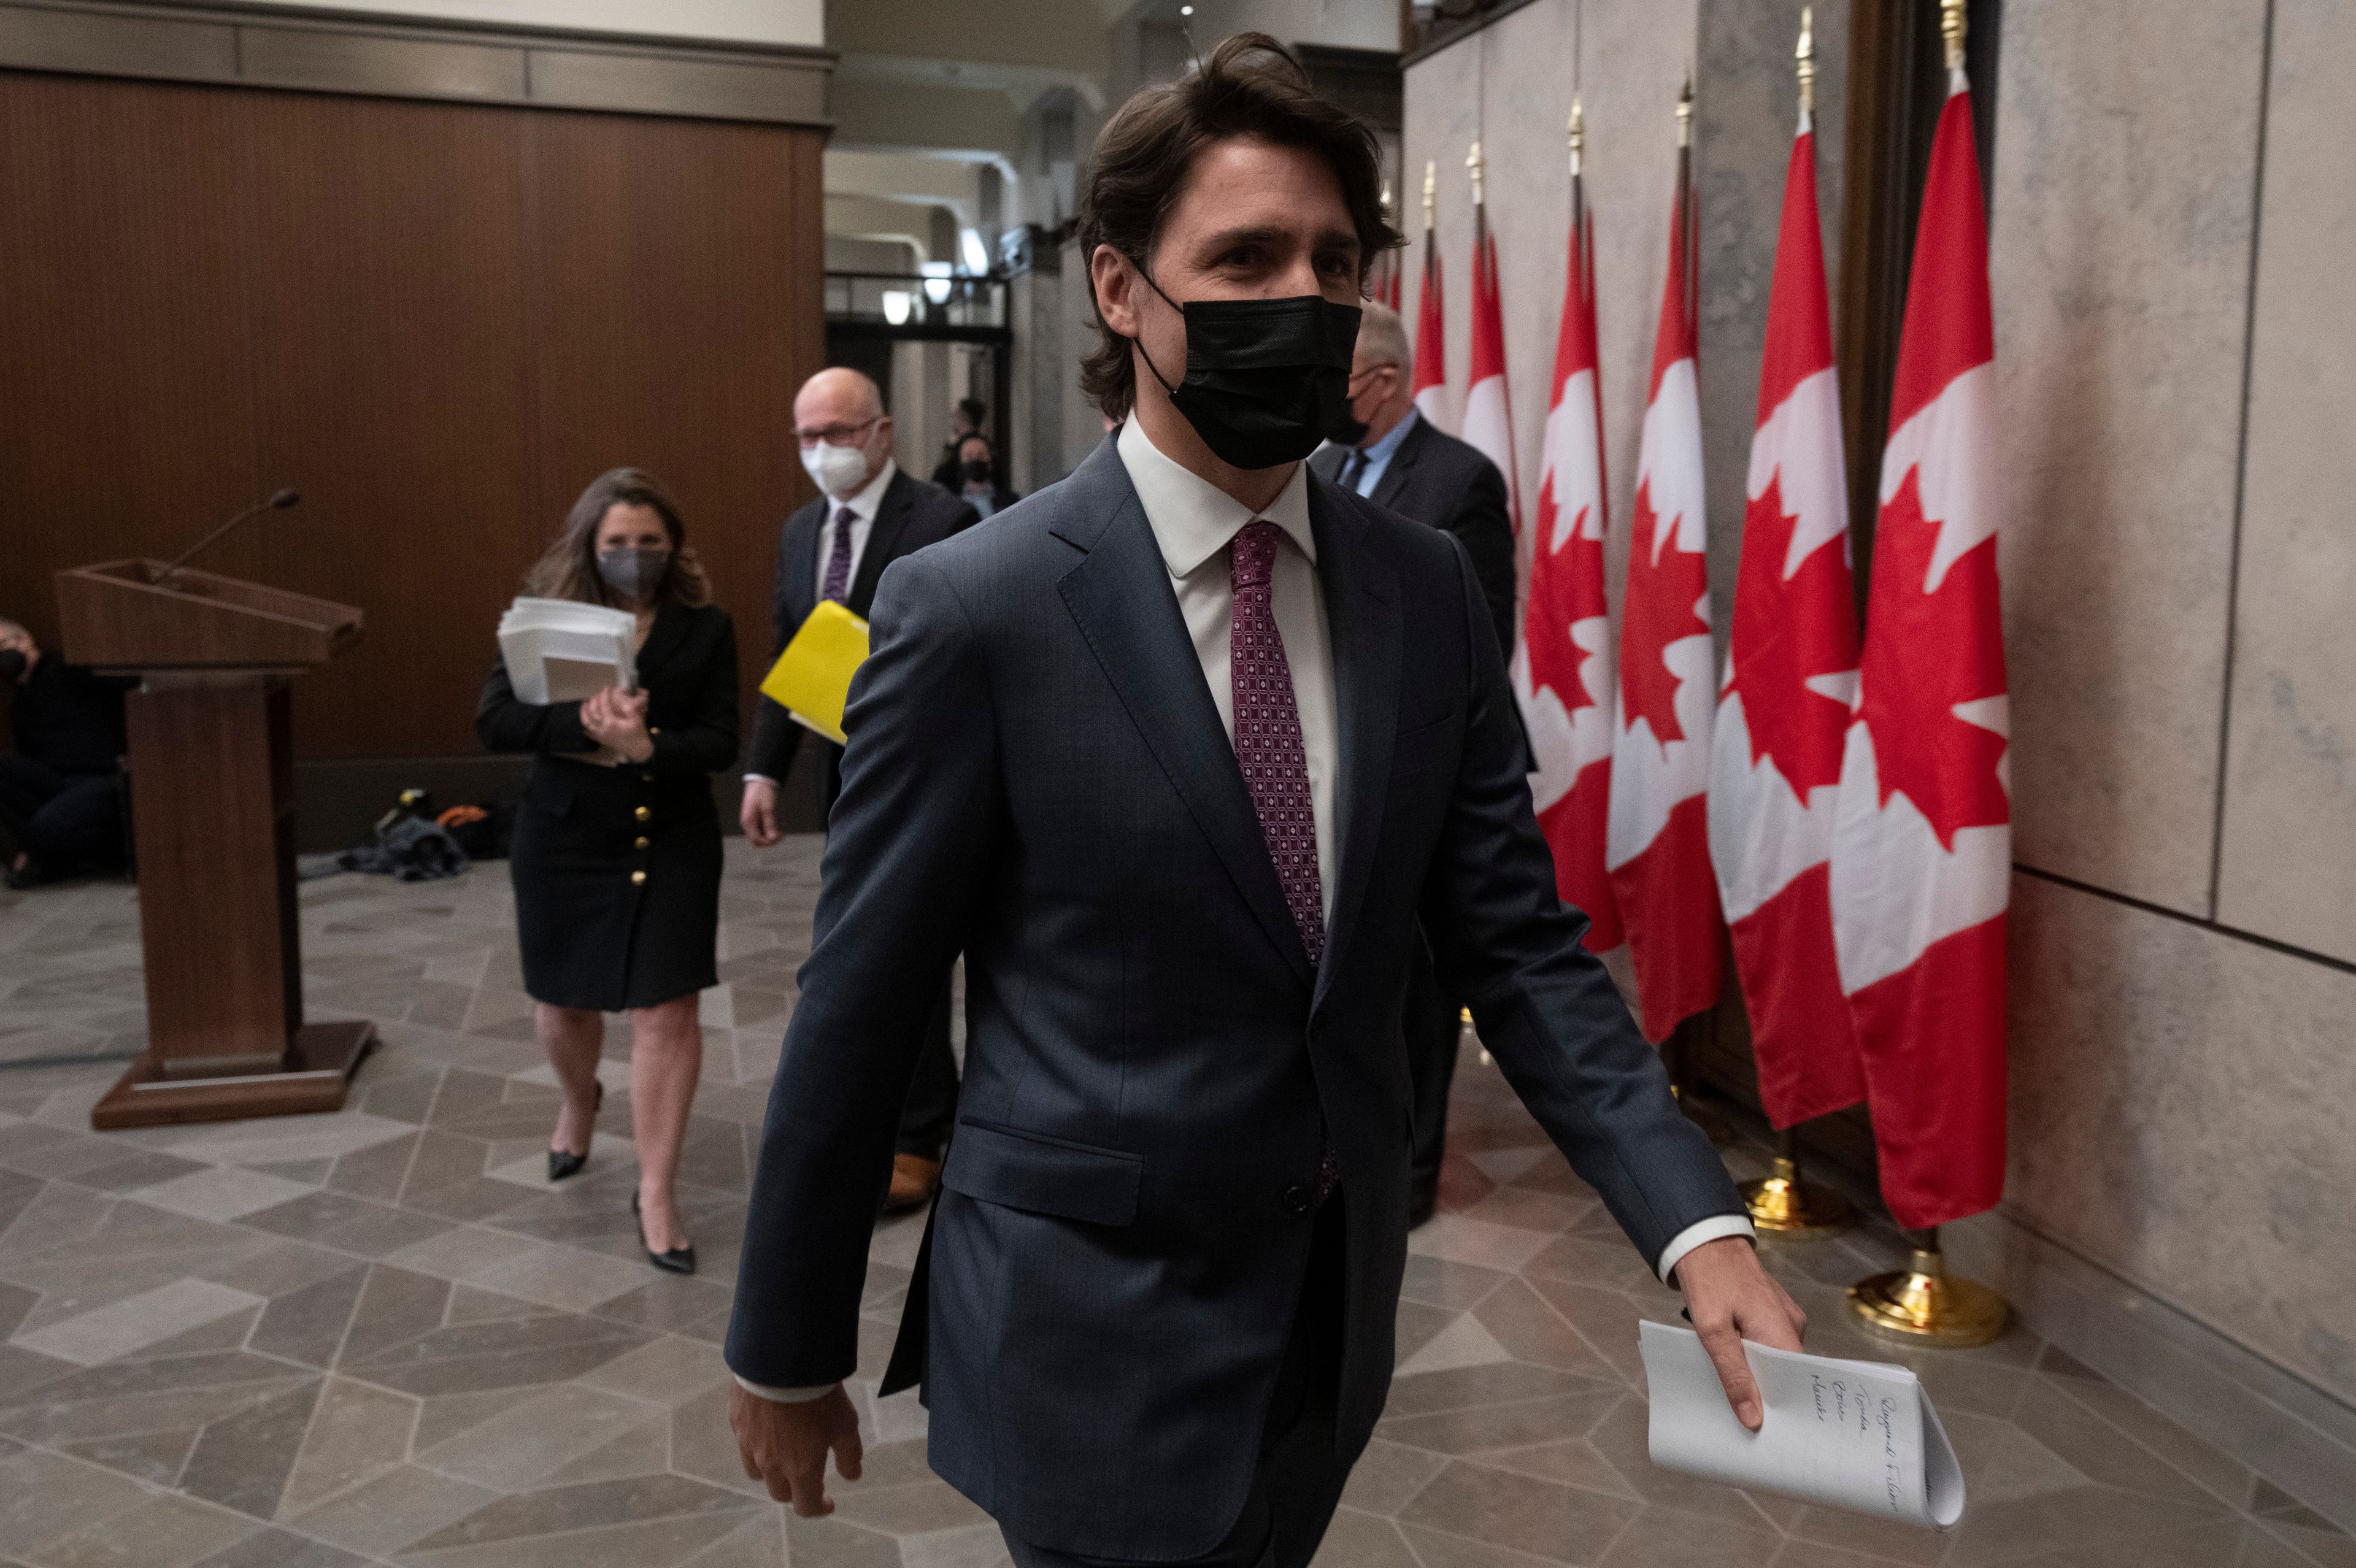 Trudeau leaves a news conference after announcing the Emergencies Act will be invoked, on Feb. 14, 2022 (Adrian Wyld/CP)